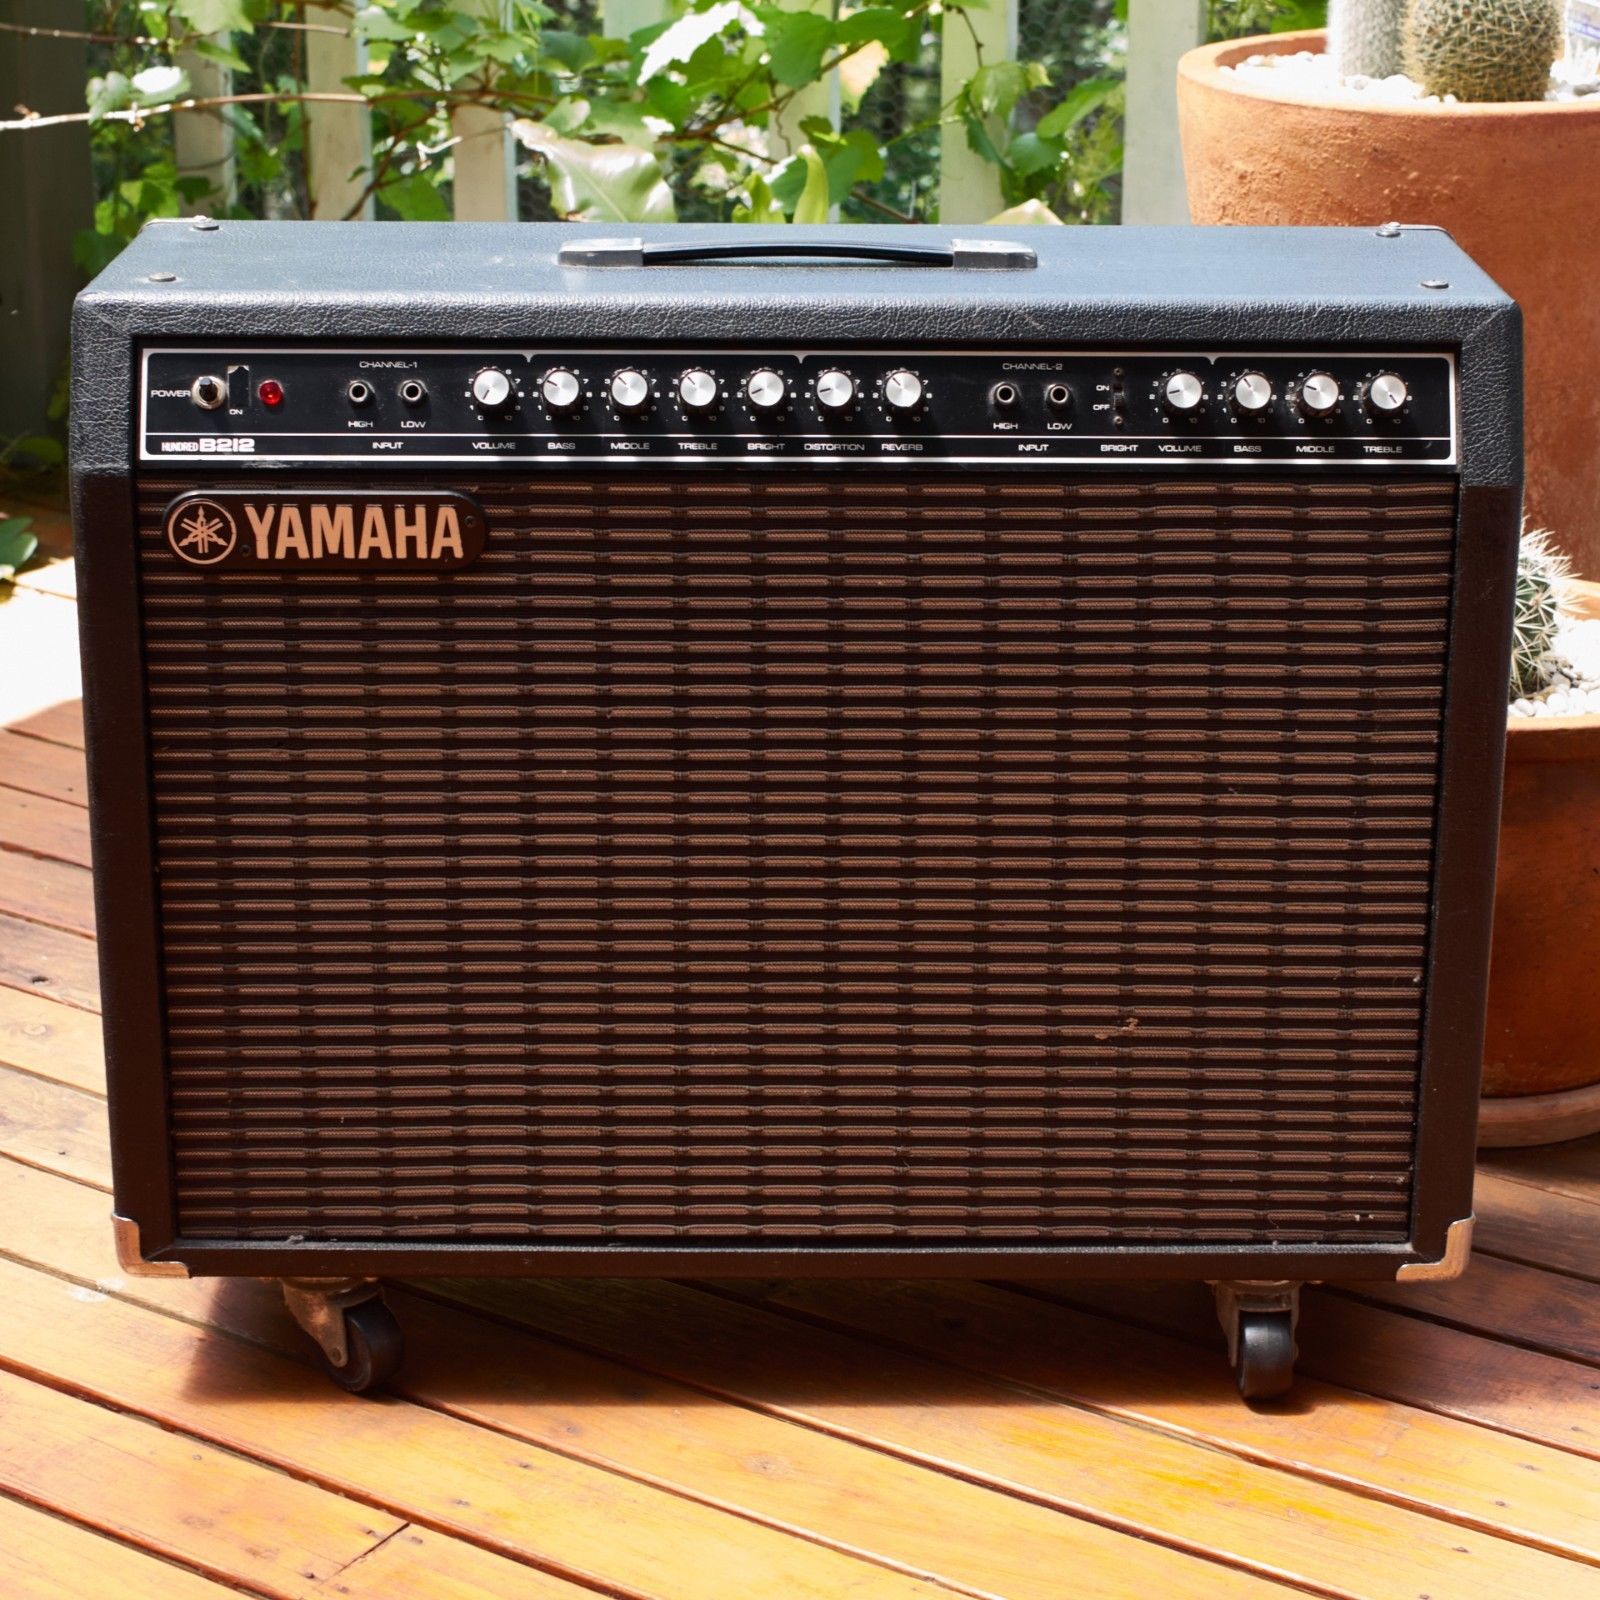 How Many Guitar Amps Do You Own?-yamaha-g100-jpg